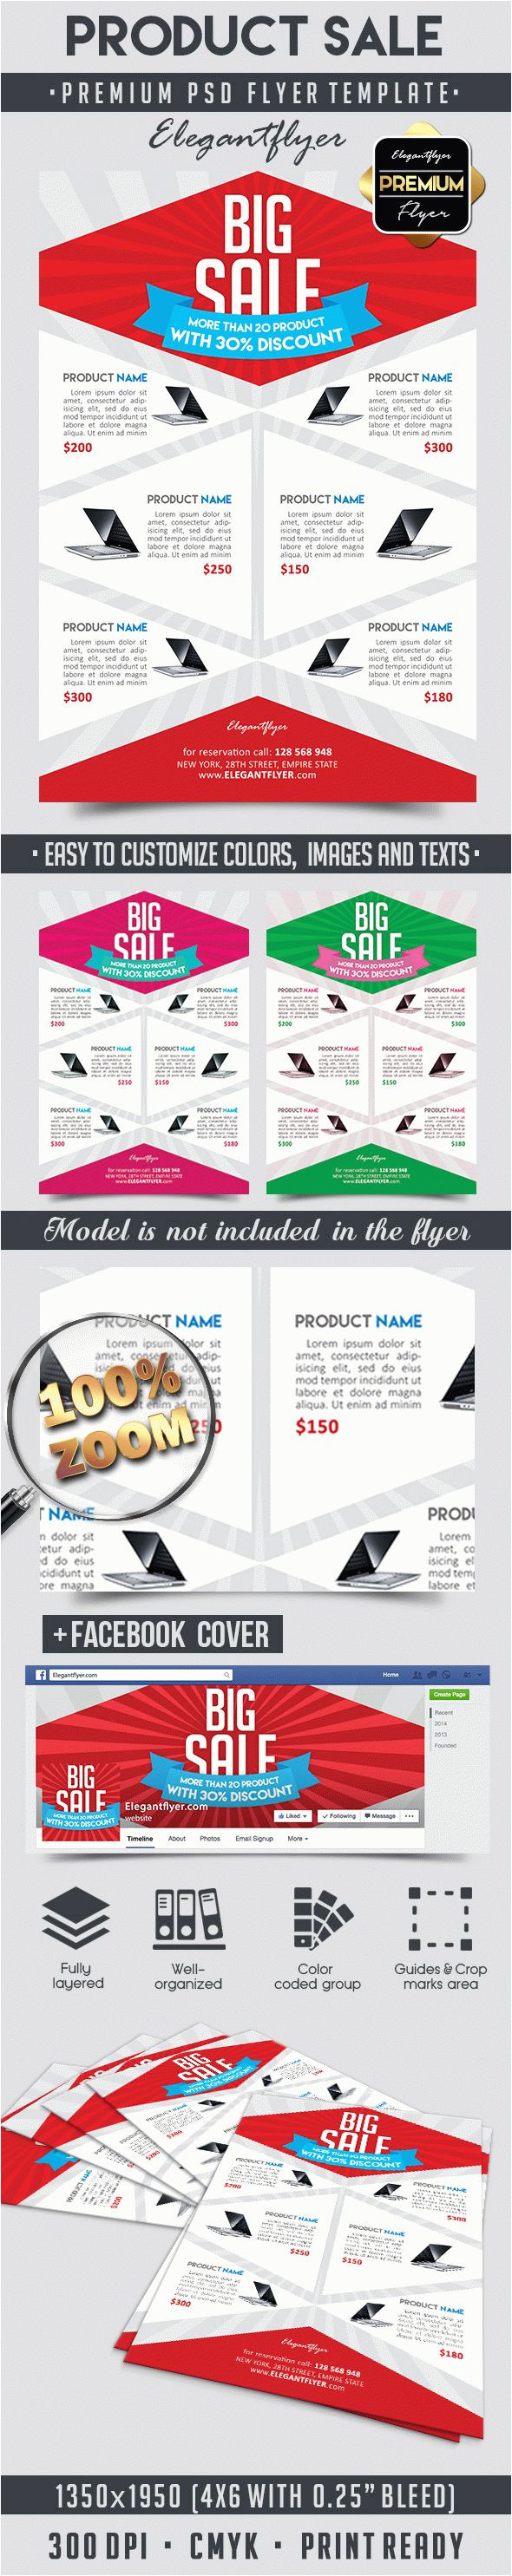 product sale flyer psd template facebook cover